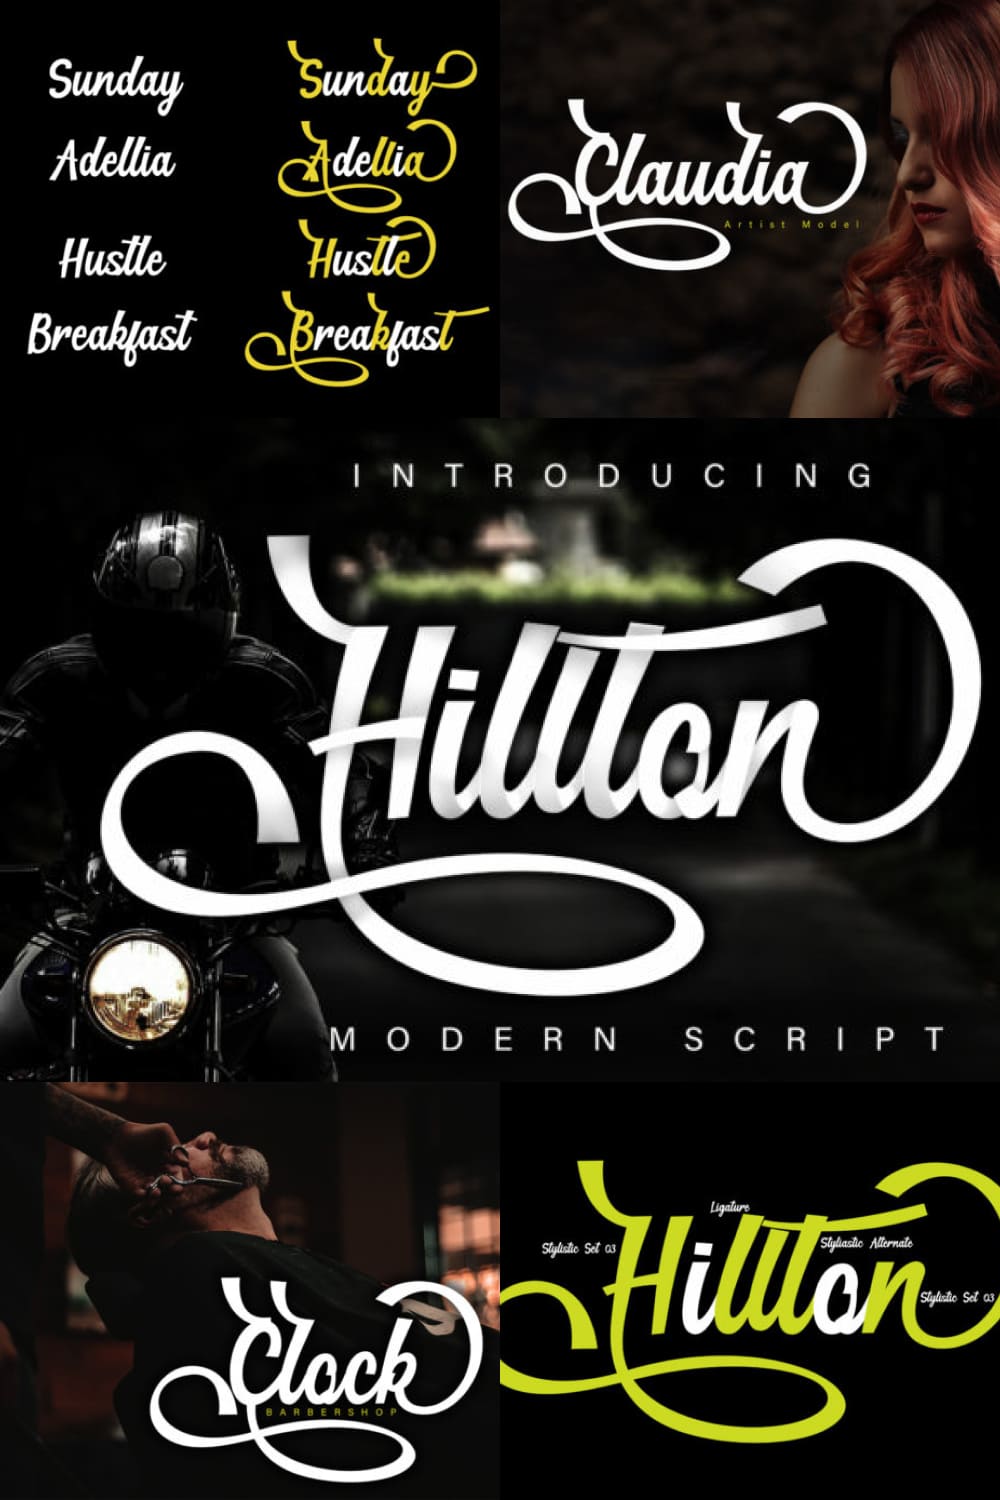 Hillton is a classy, elegant and super stylish modern script font perfectly suited for many projects.